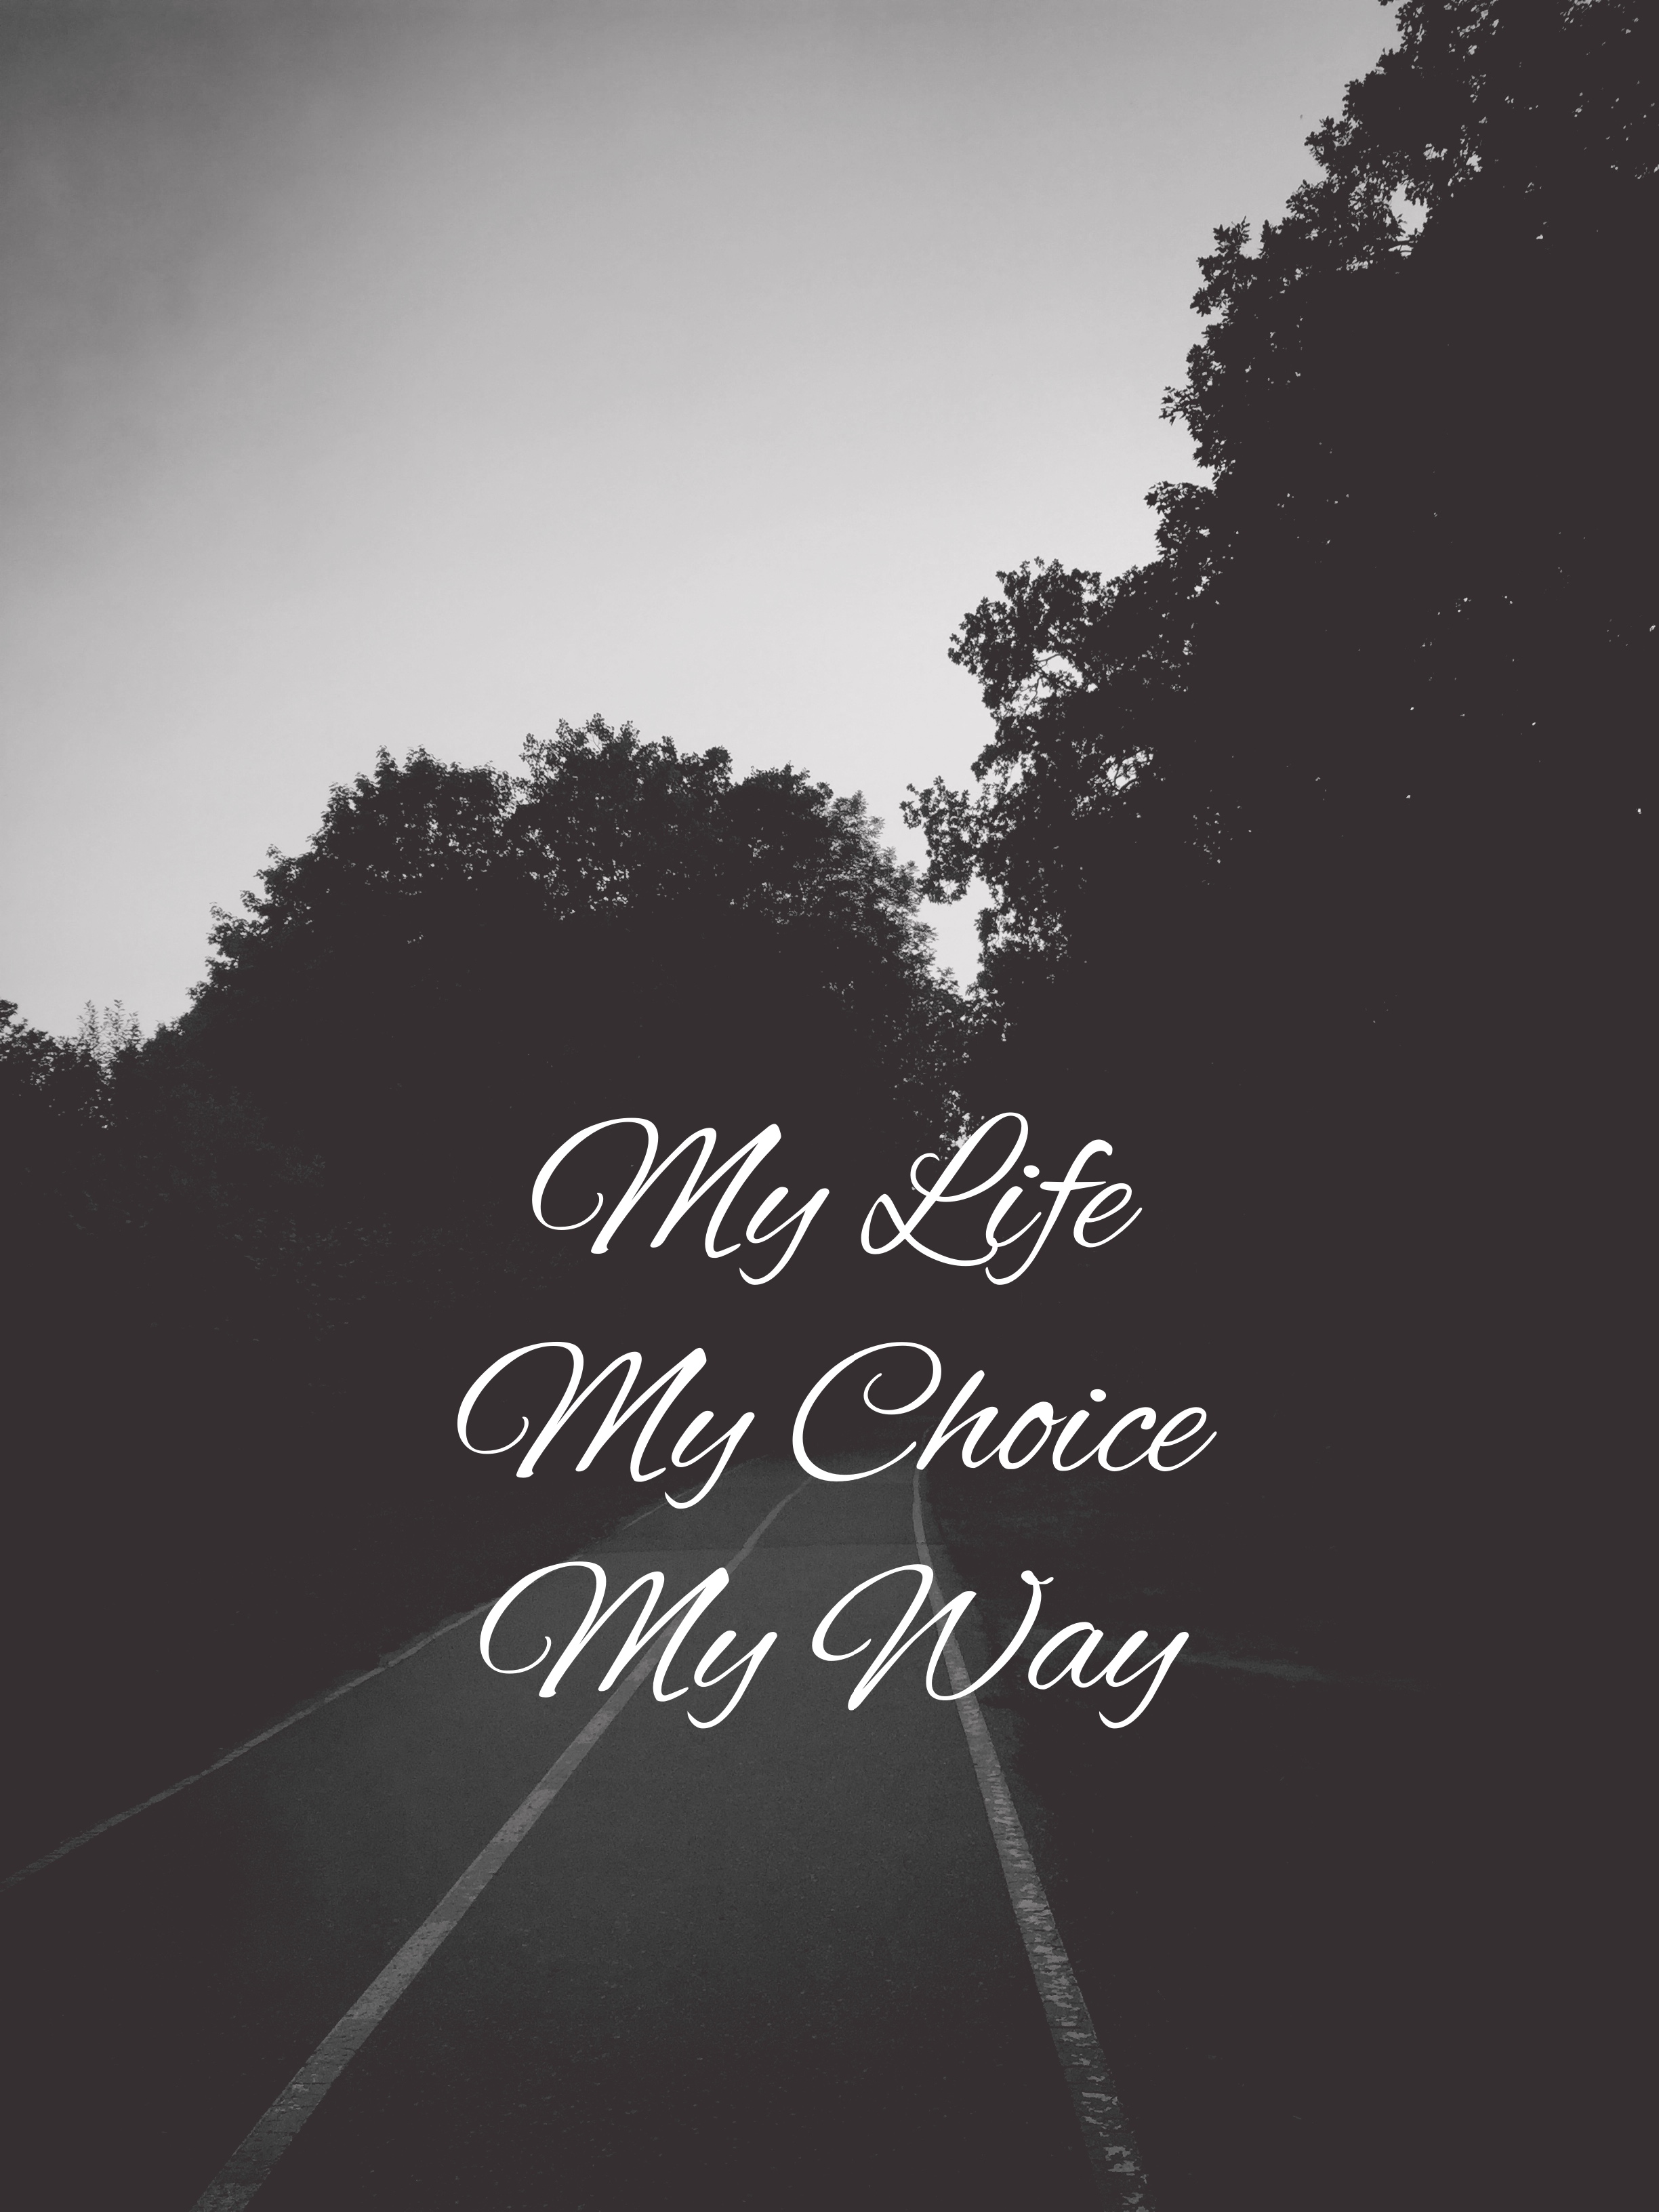 words, quotation, quote, bw, text, chb, inscription, road, path, way